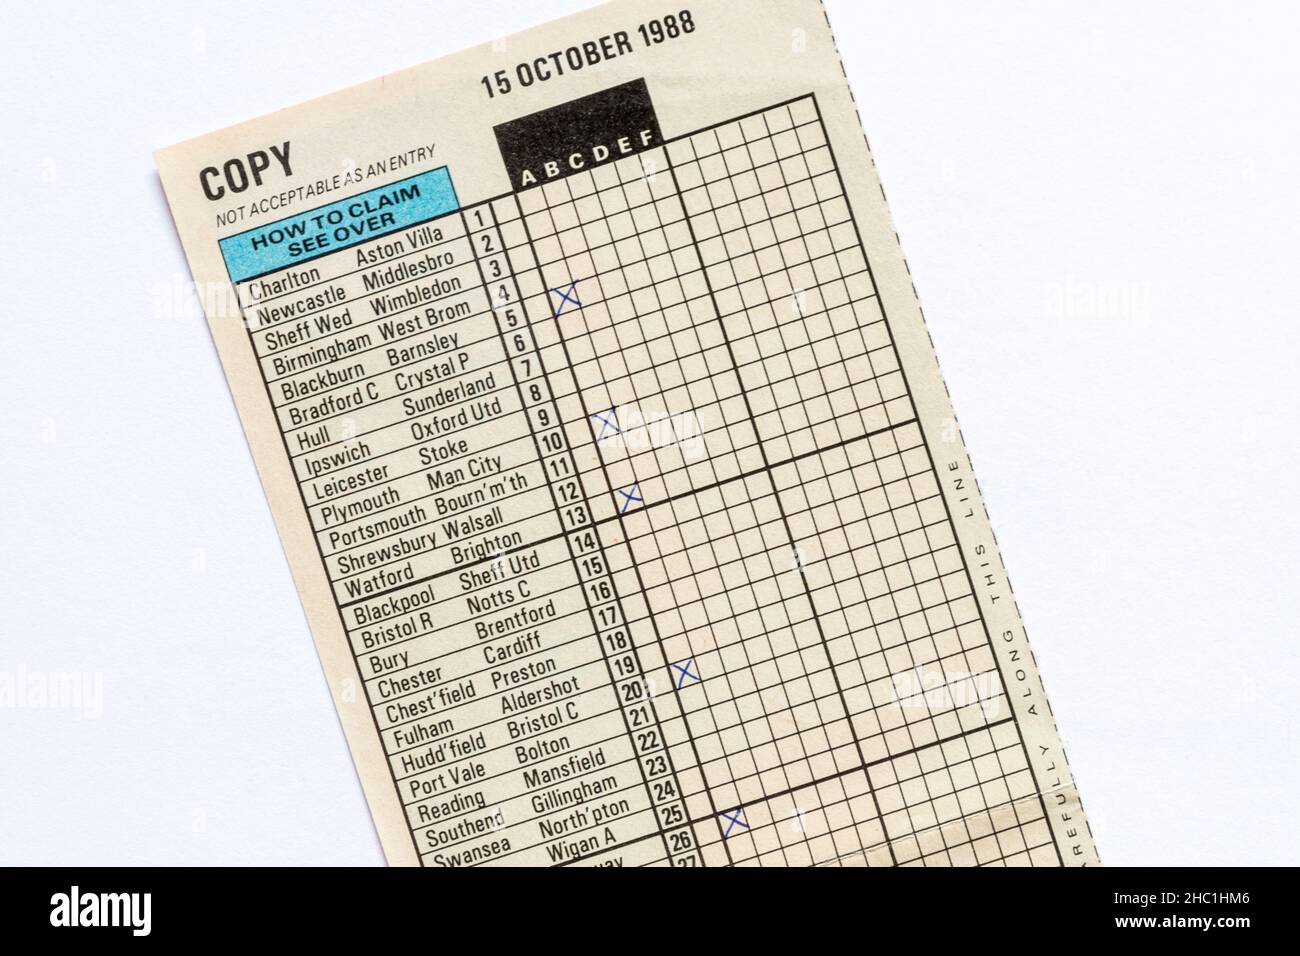 Old Littlewoods football pools coupon from 1988 Stock Photo